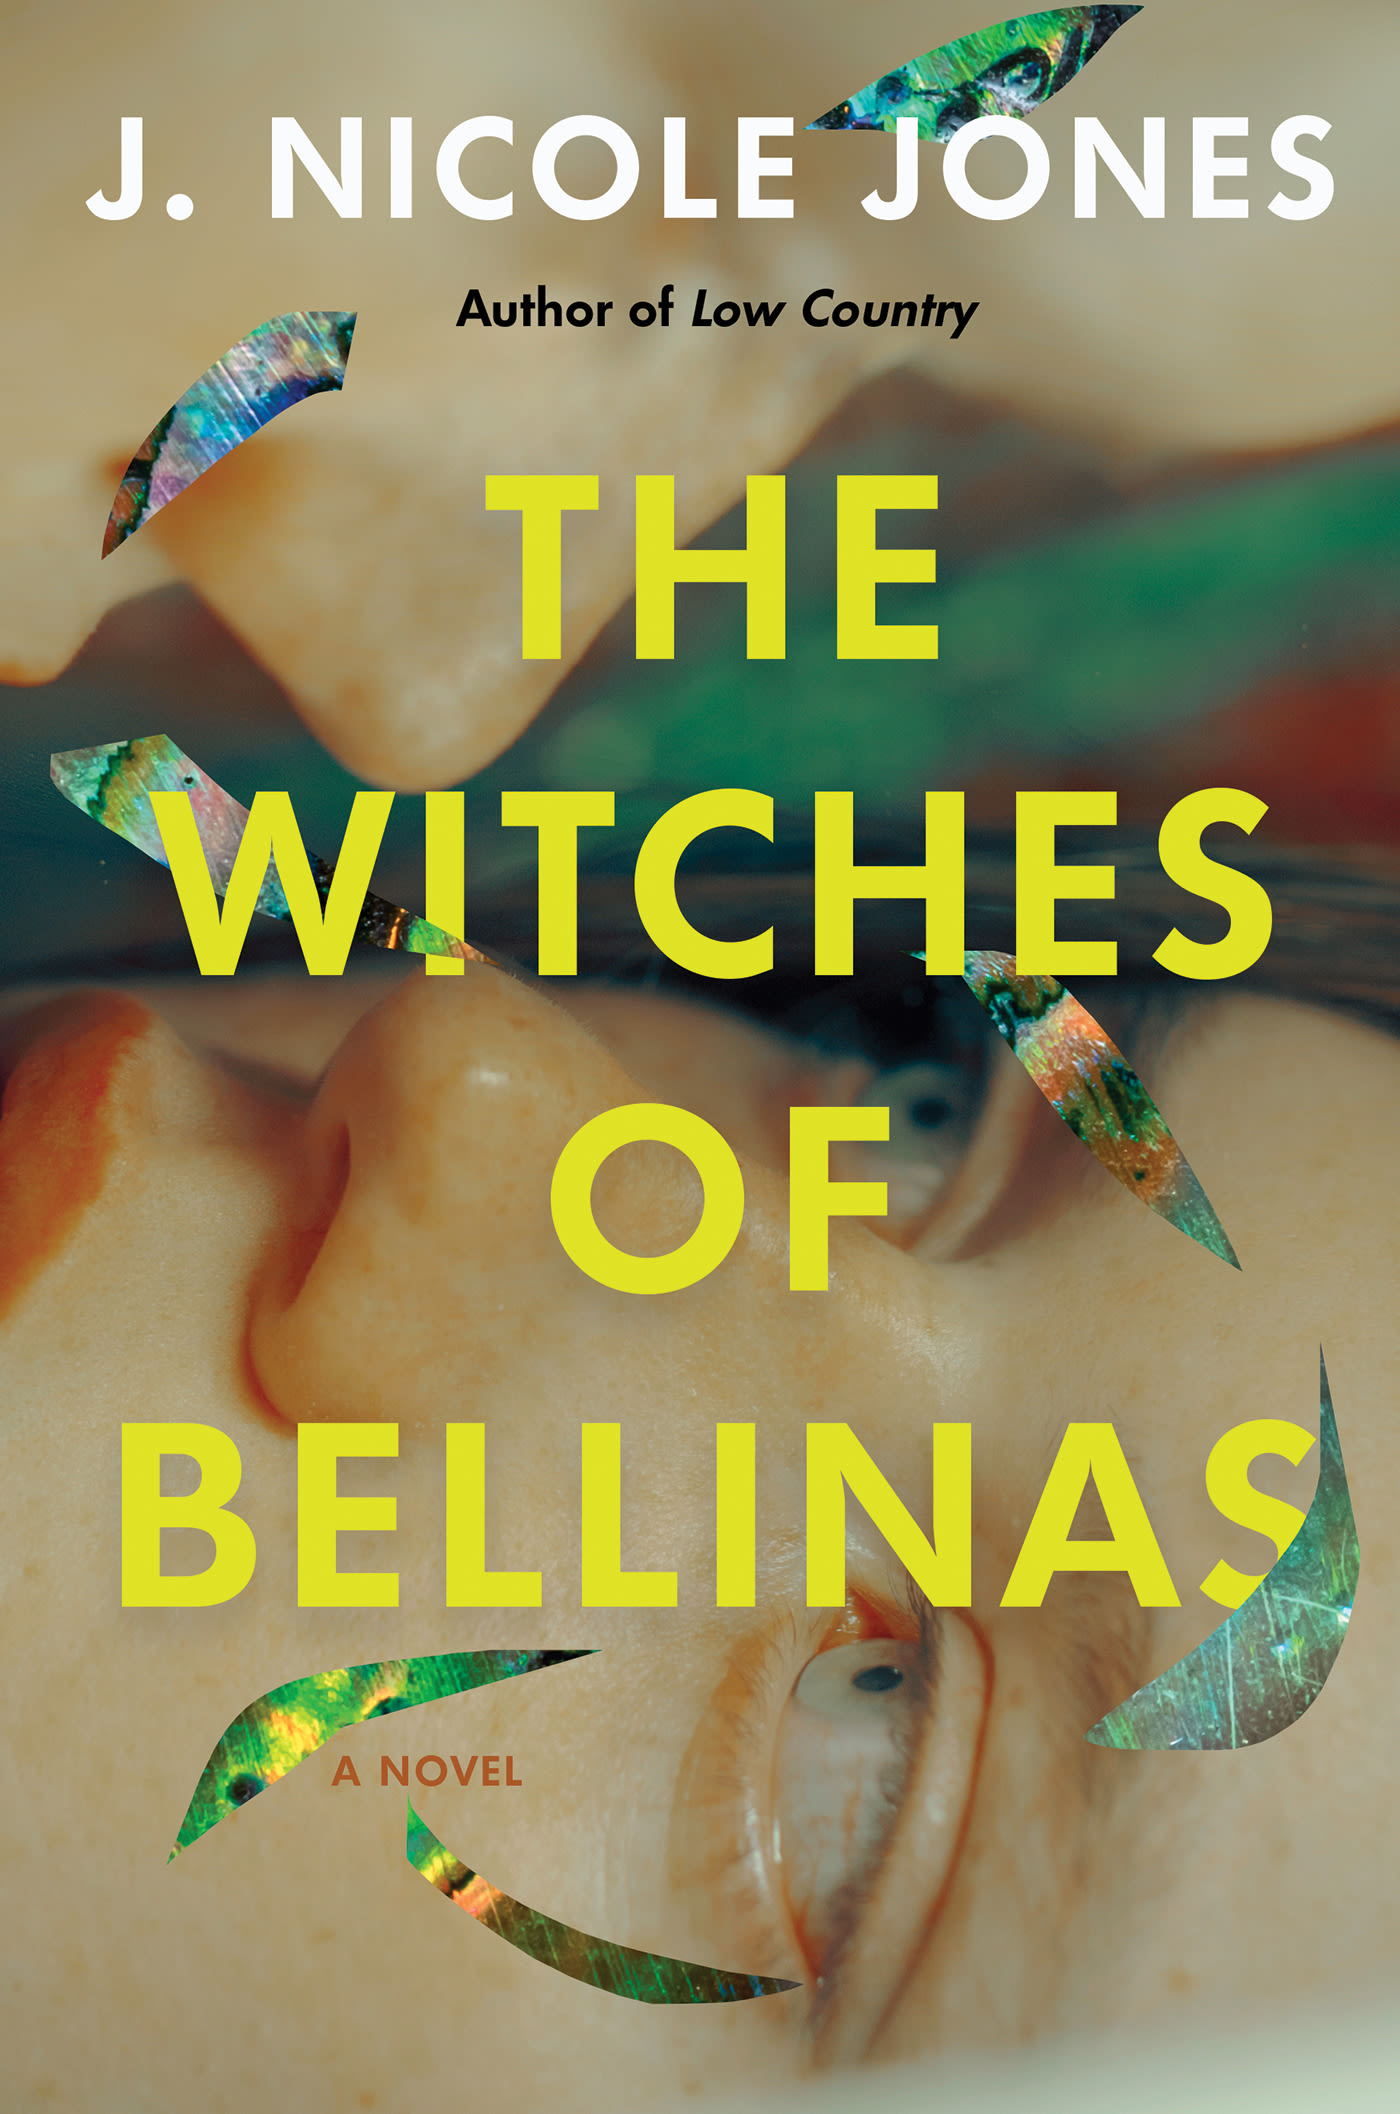 Seeking community but finding a cult in the tense, compelling 'The Witches of Bellinas'